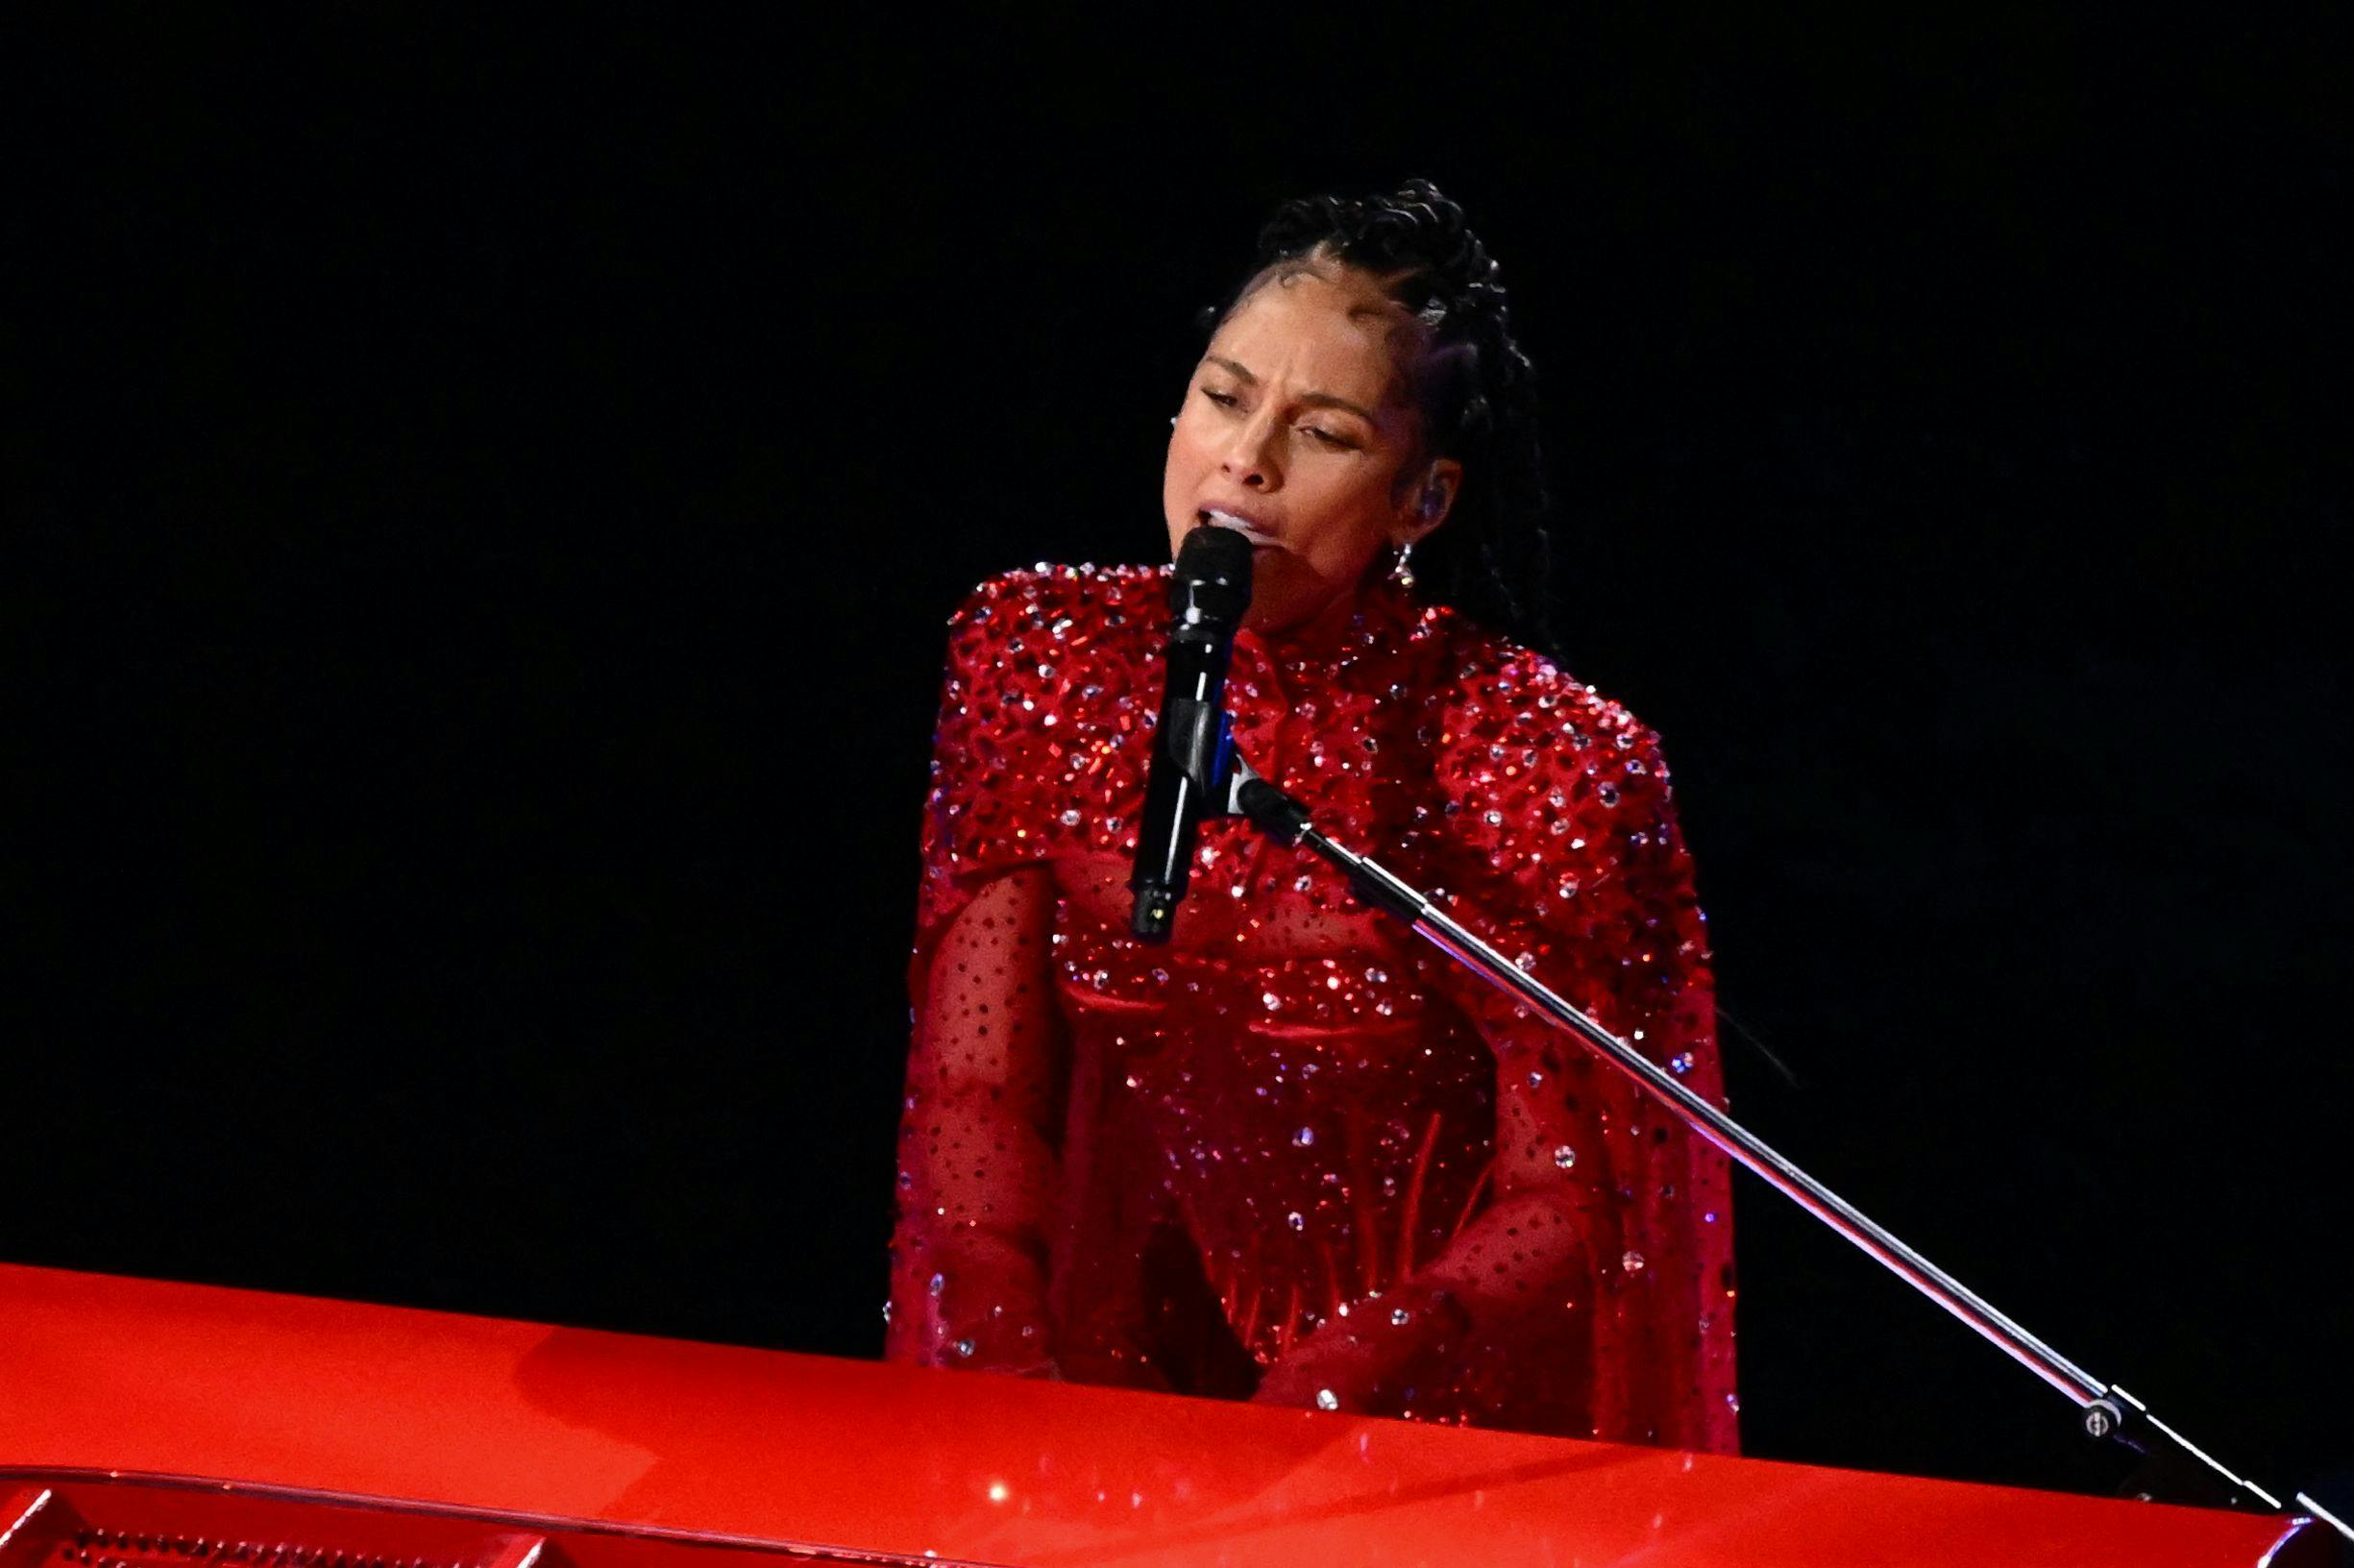 US singer-songwriter Alicia Keys performs during Apple Music halftime show of Super Bowl LVIII between the Kansas City Chiefs and the San Francisco 49ers at Allegiant Stadium in Las Vegas, Nevada, February 11, 2024. (Photo by Patrick T. Fallon / AFP)